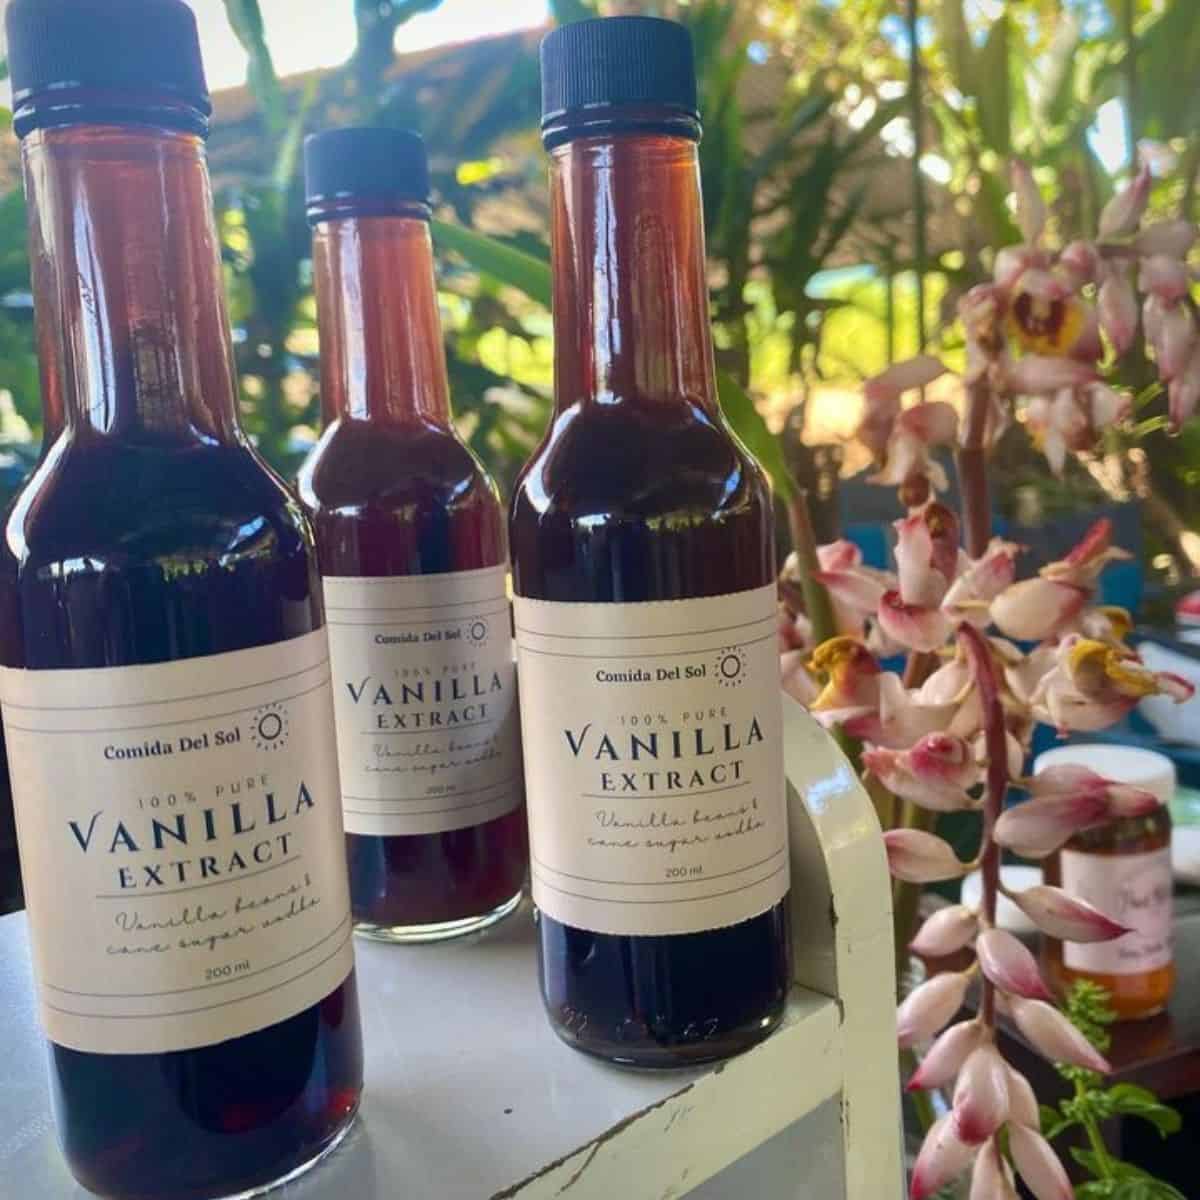 Three bottles of vanilla extract placed in a garden